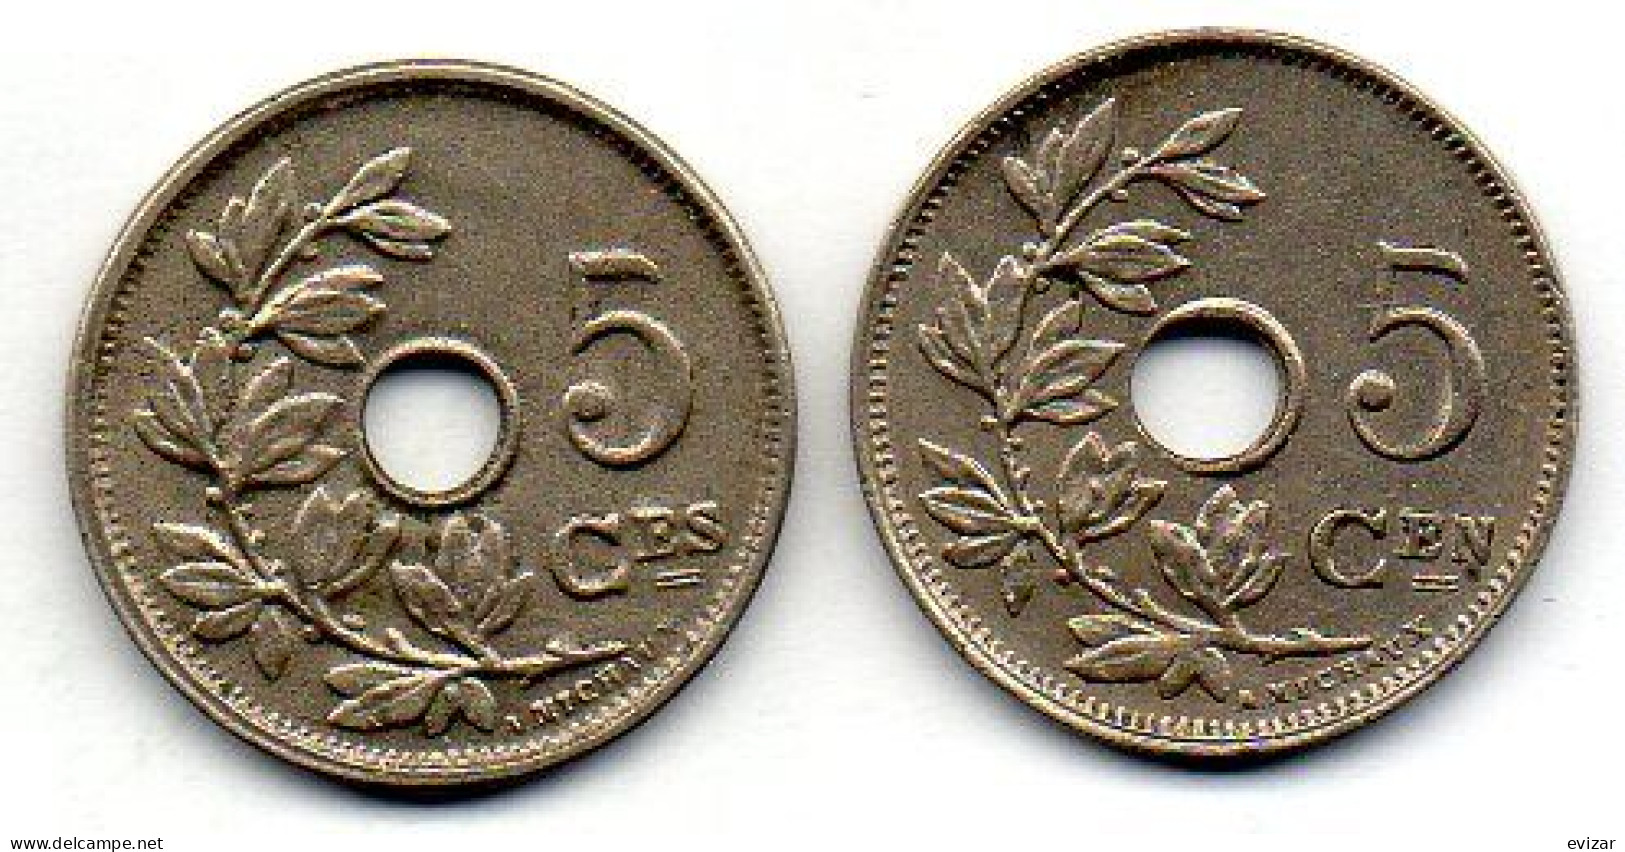 BELGIUM - Set Of Two Coins 5 Centimes, Copper-Nickel, Year 1920, 1924, KM # 66, 67, French & Dutch Legend - 5 Centimes